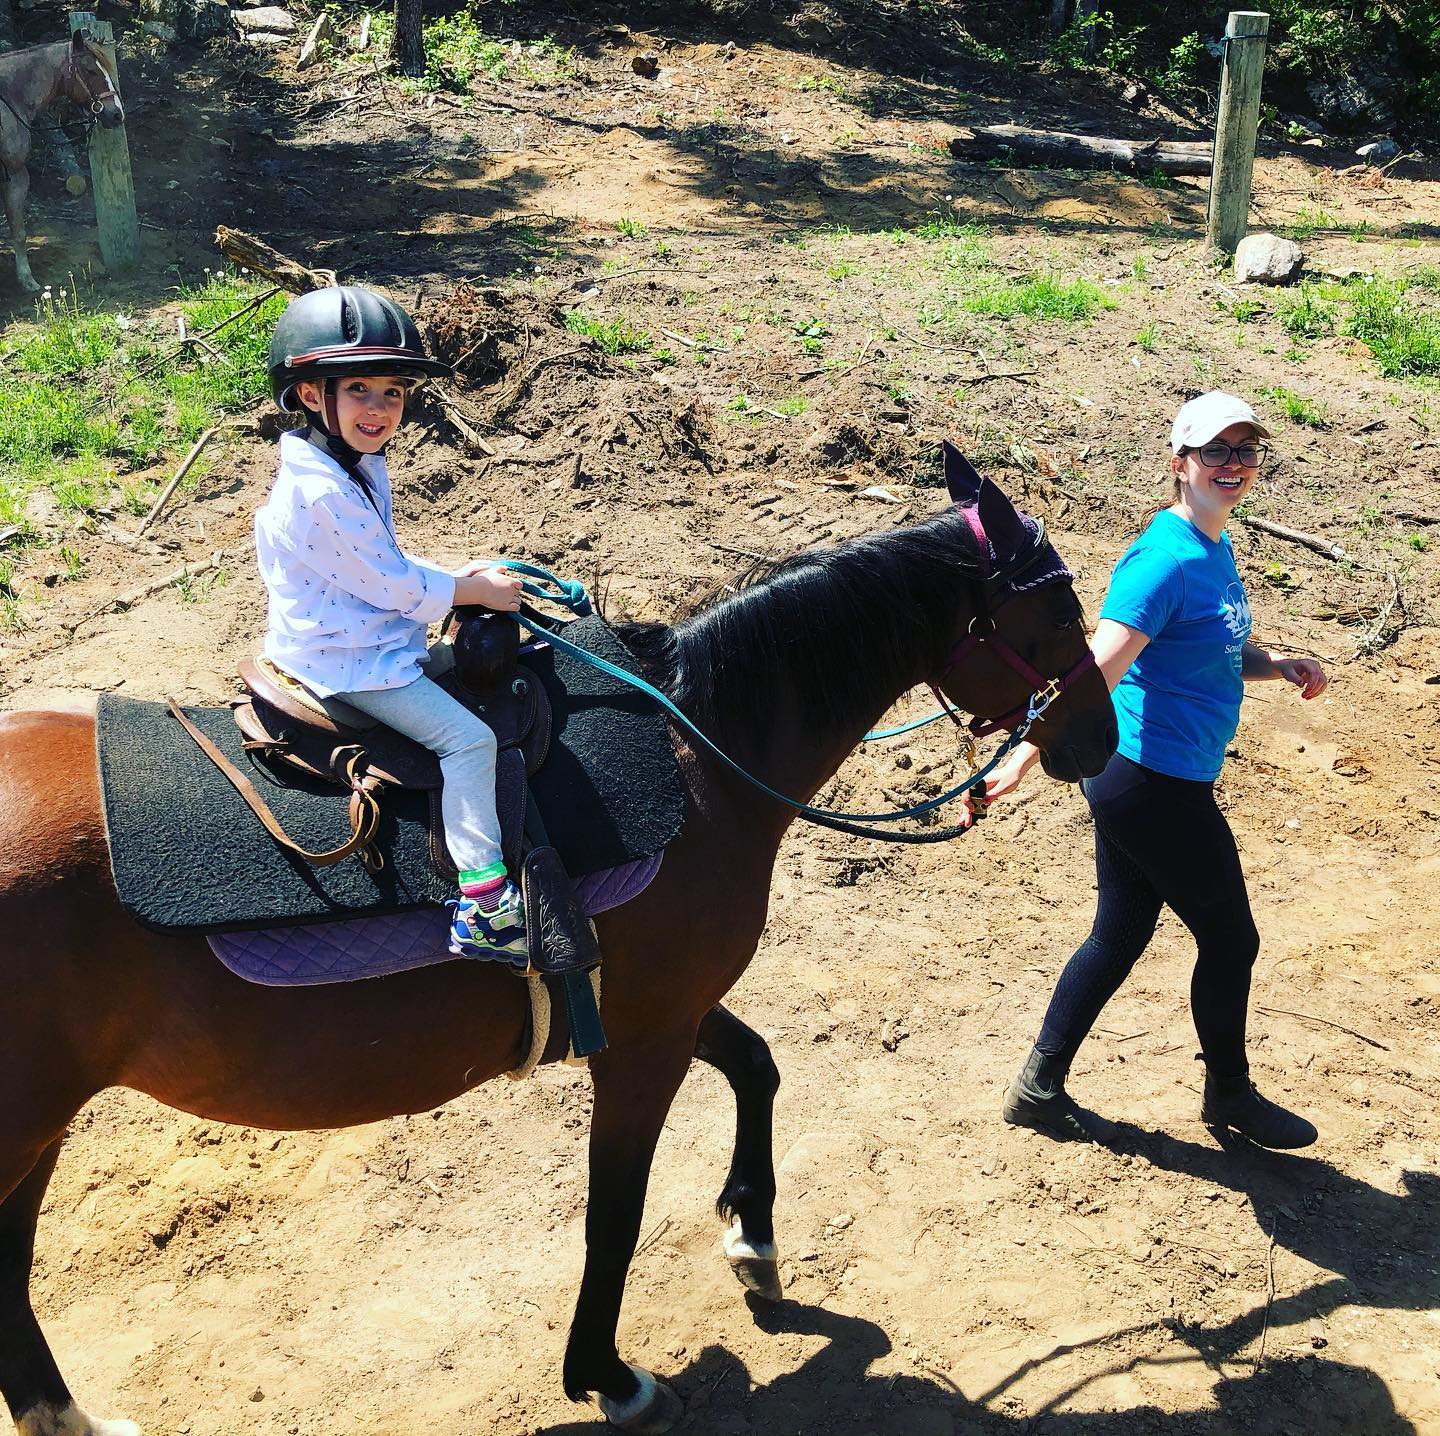 An experienced guide and instructor enjoy the "Saddle Up" horse camp at South Algonquin Trails